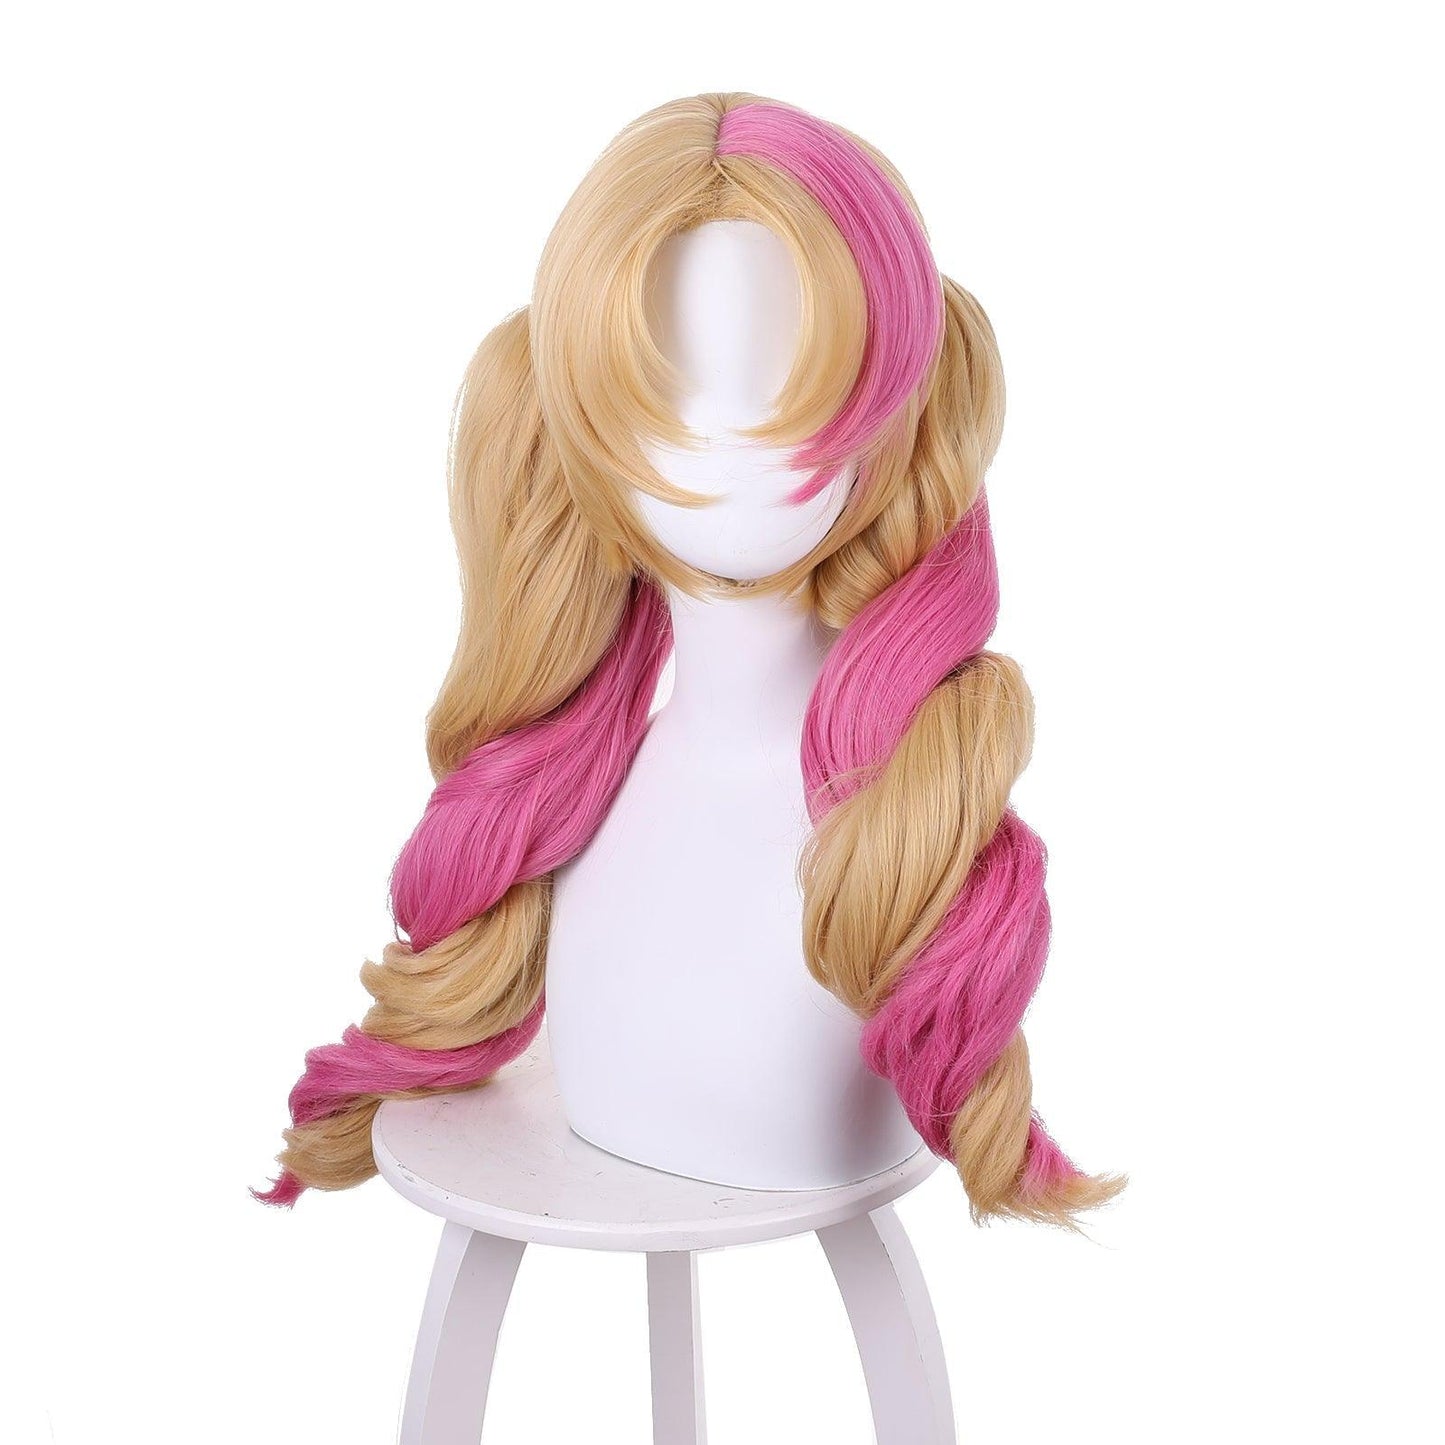 coscrew Anime Gwen Yellow peach pink Cosplay Wig of League of Legends/LOL 530D - coscrew